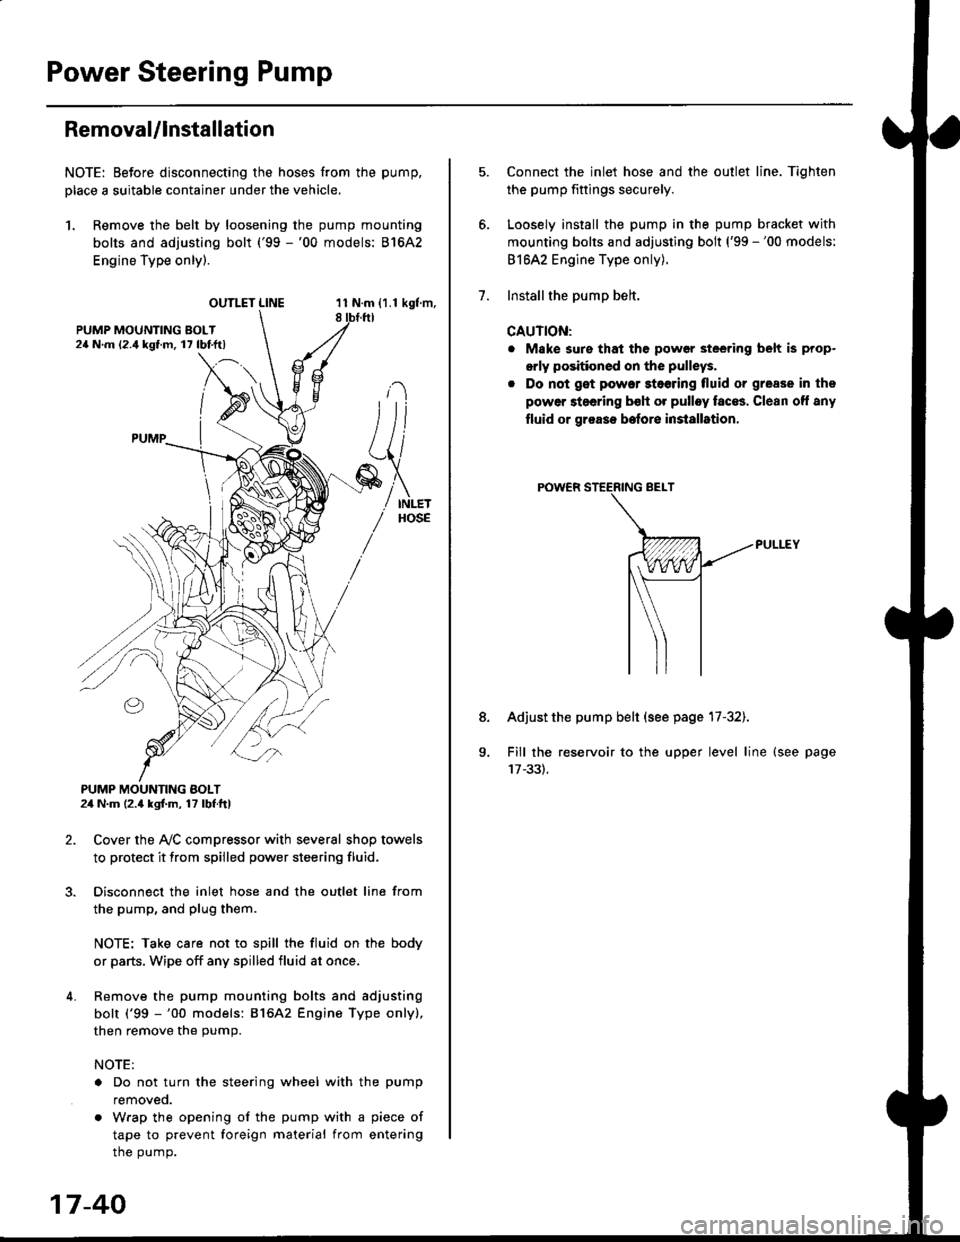 HONDA CIVIC 1996 6.G Owners Manual Power Steering Pump
RemovaUlnstallation
NOTE: Eefore disconnecting the hoses from the pump,
Dlace a suitable container under the vehicle.
1. Remove the belt by loosening the pump mounting
bolts and ad